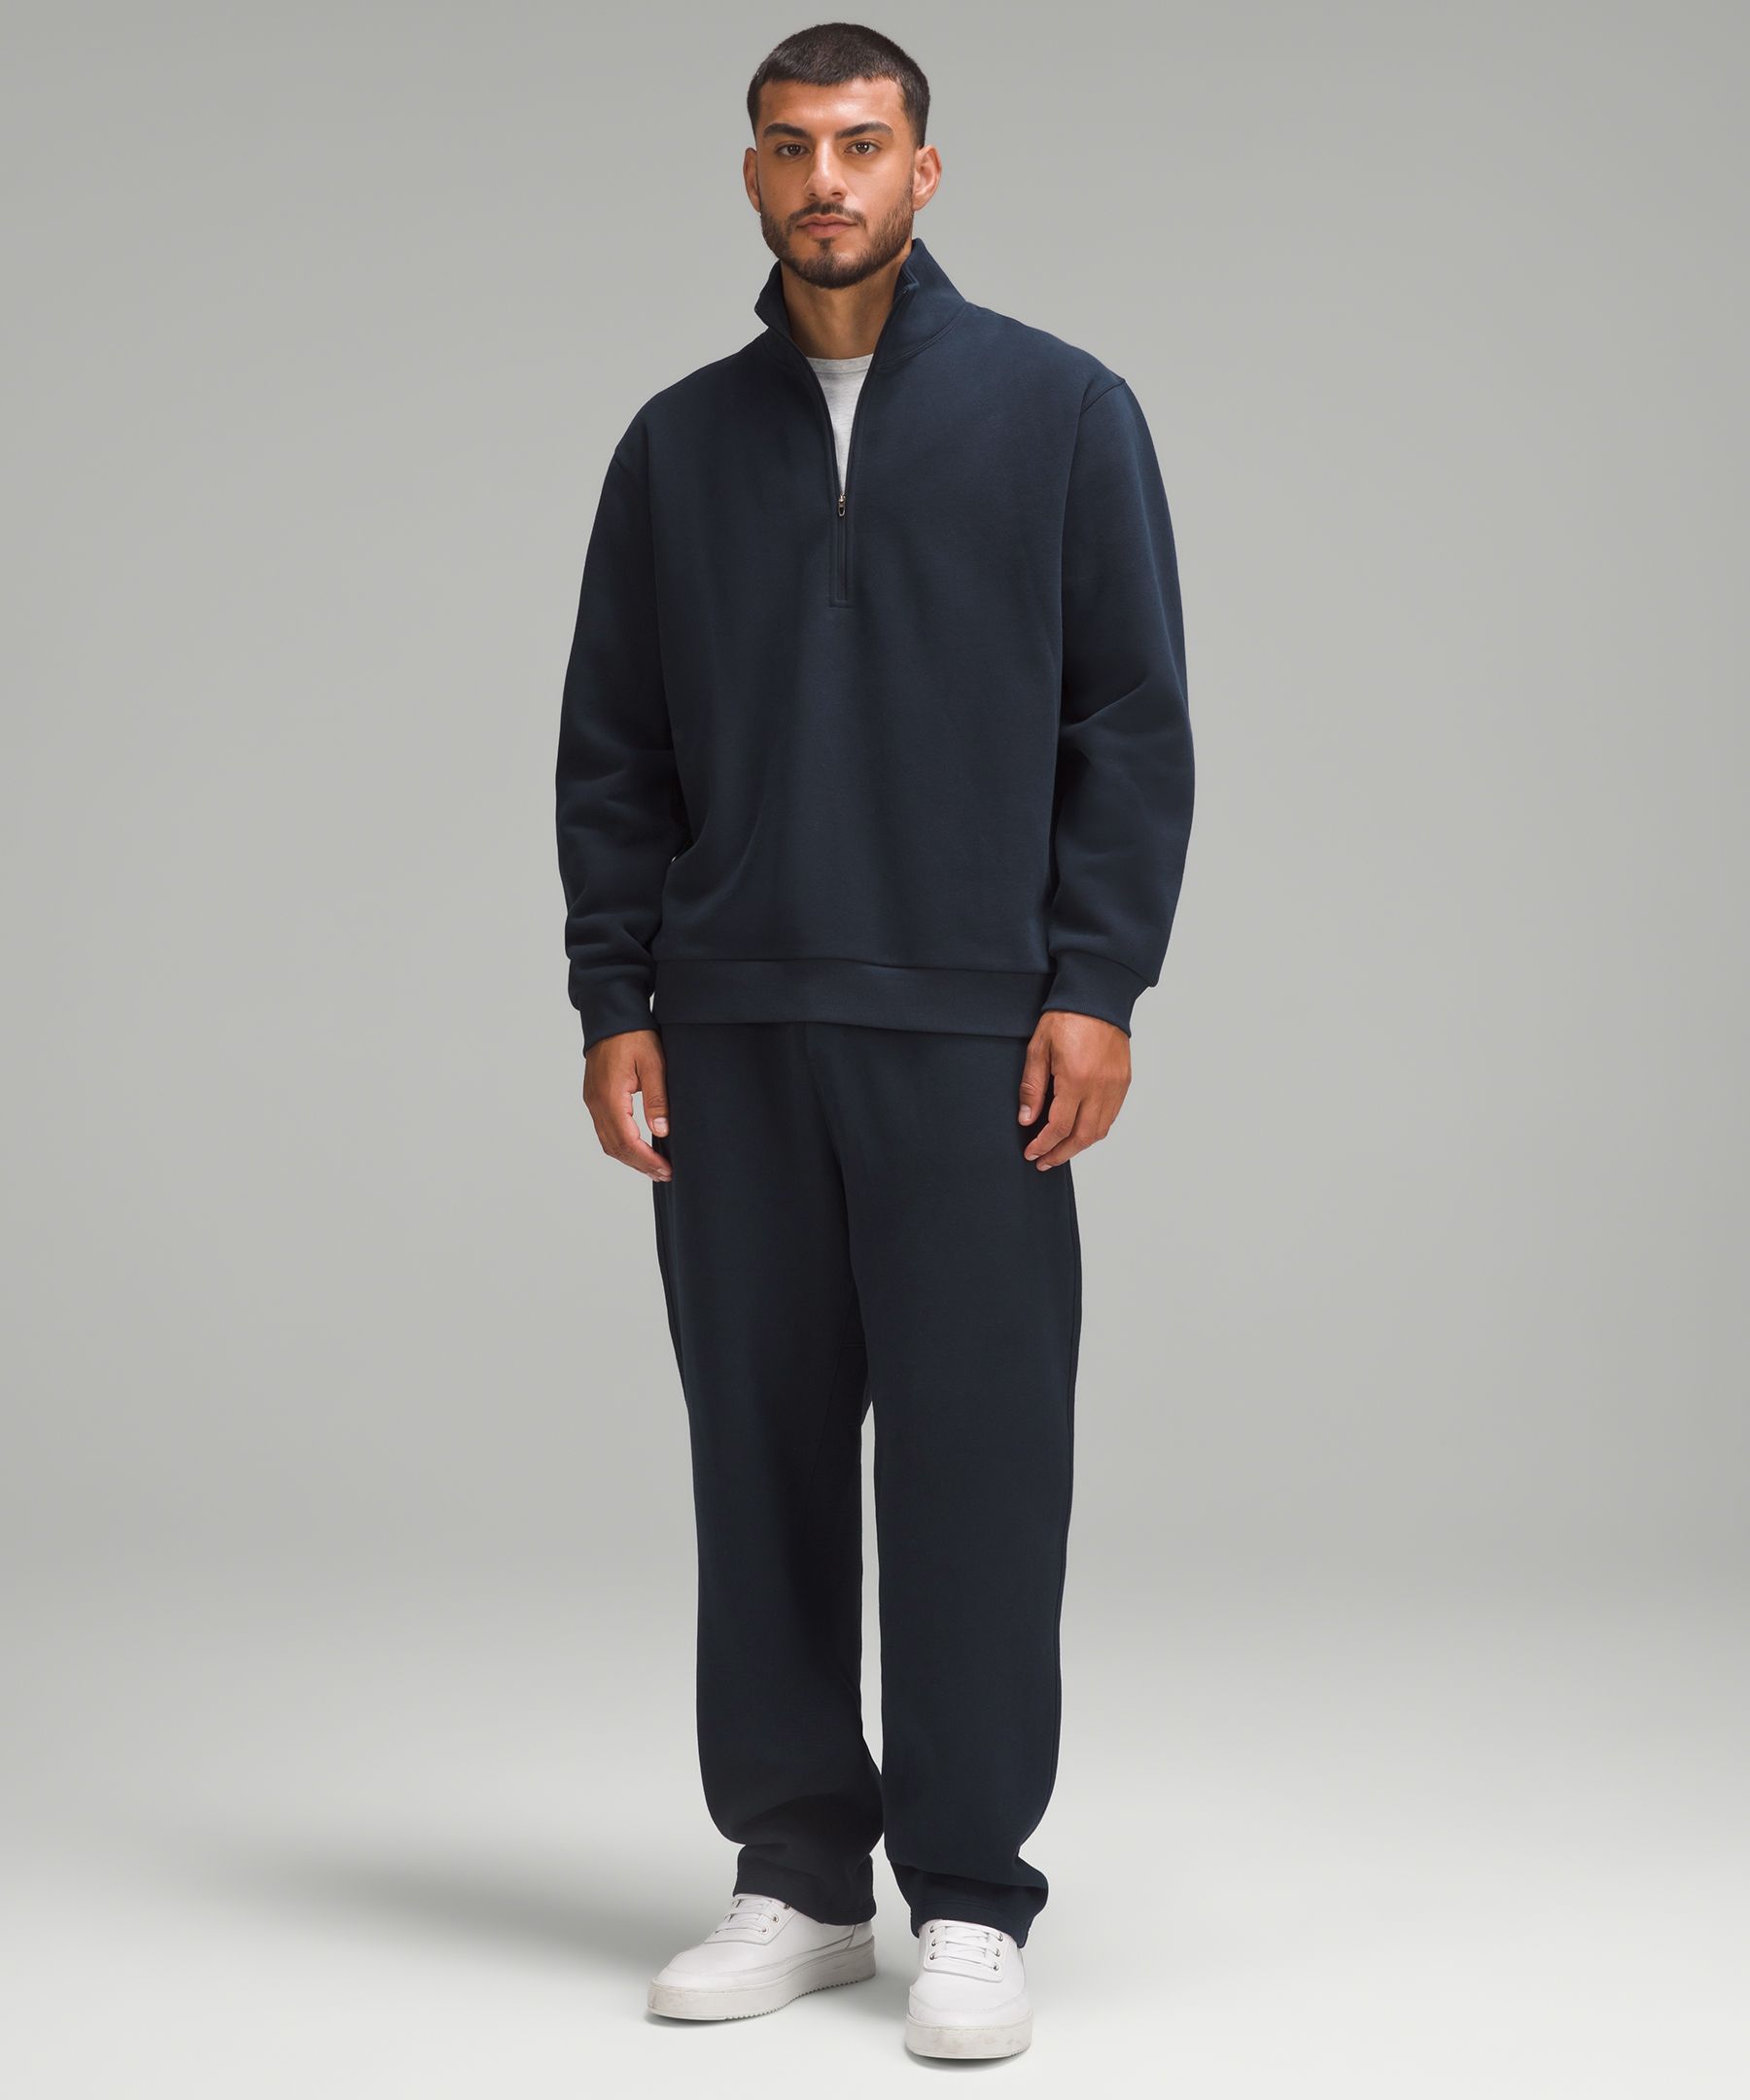 Steady State Pant *Tall | Men's Joggers